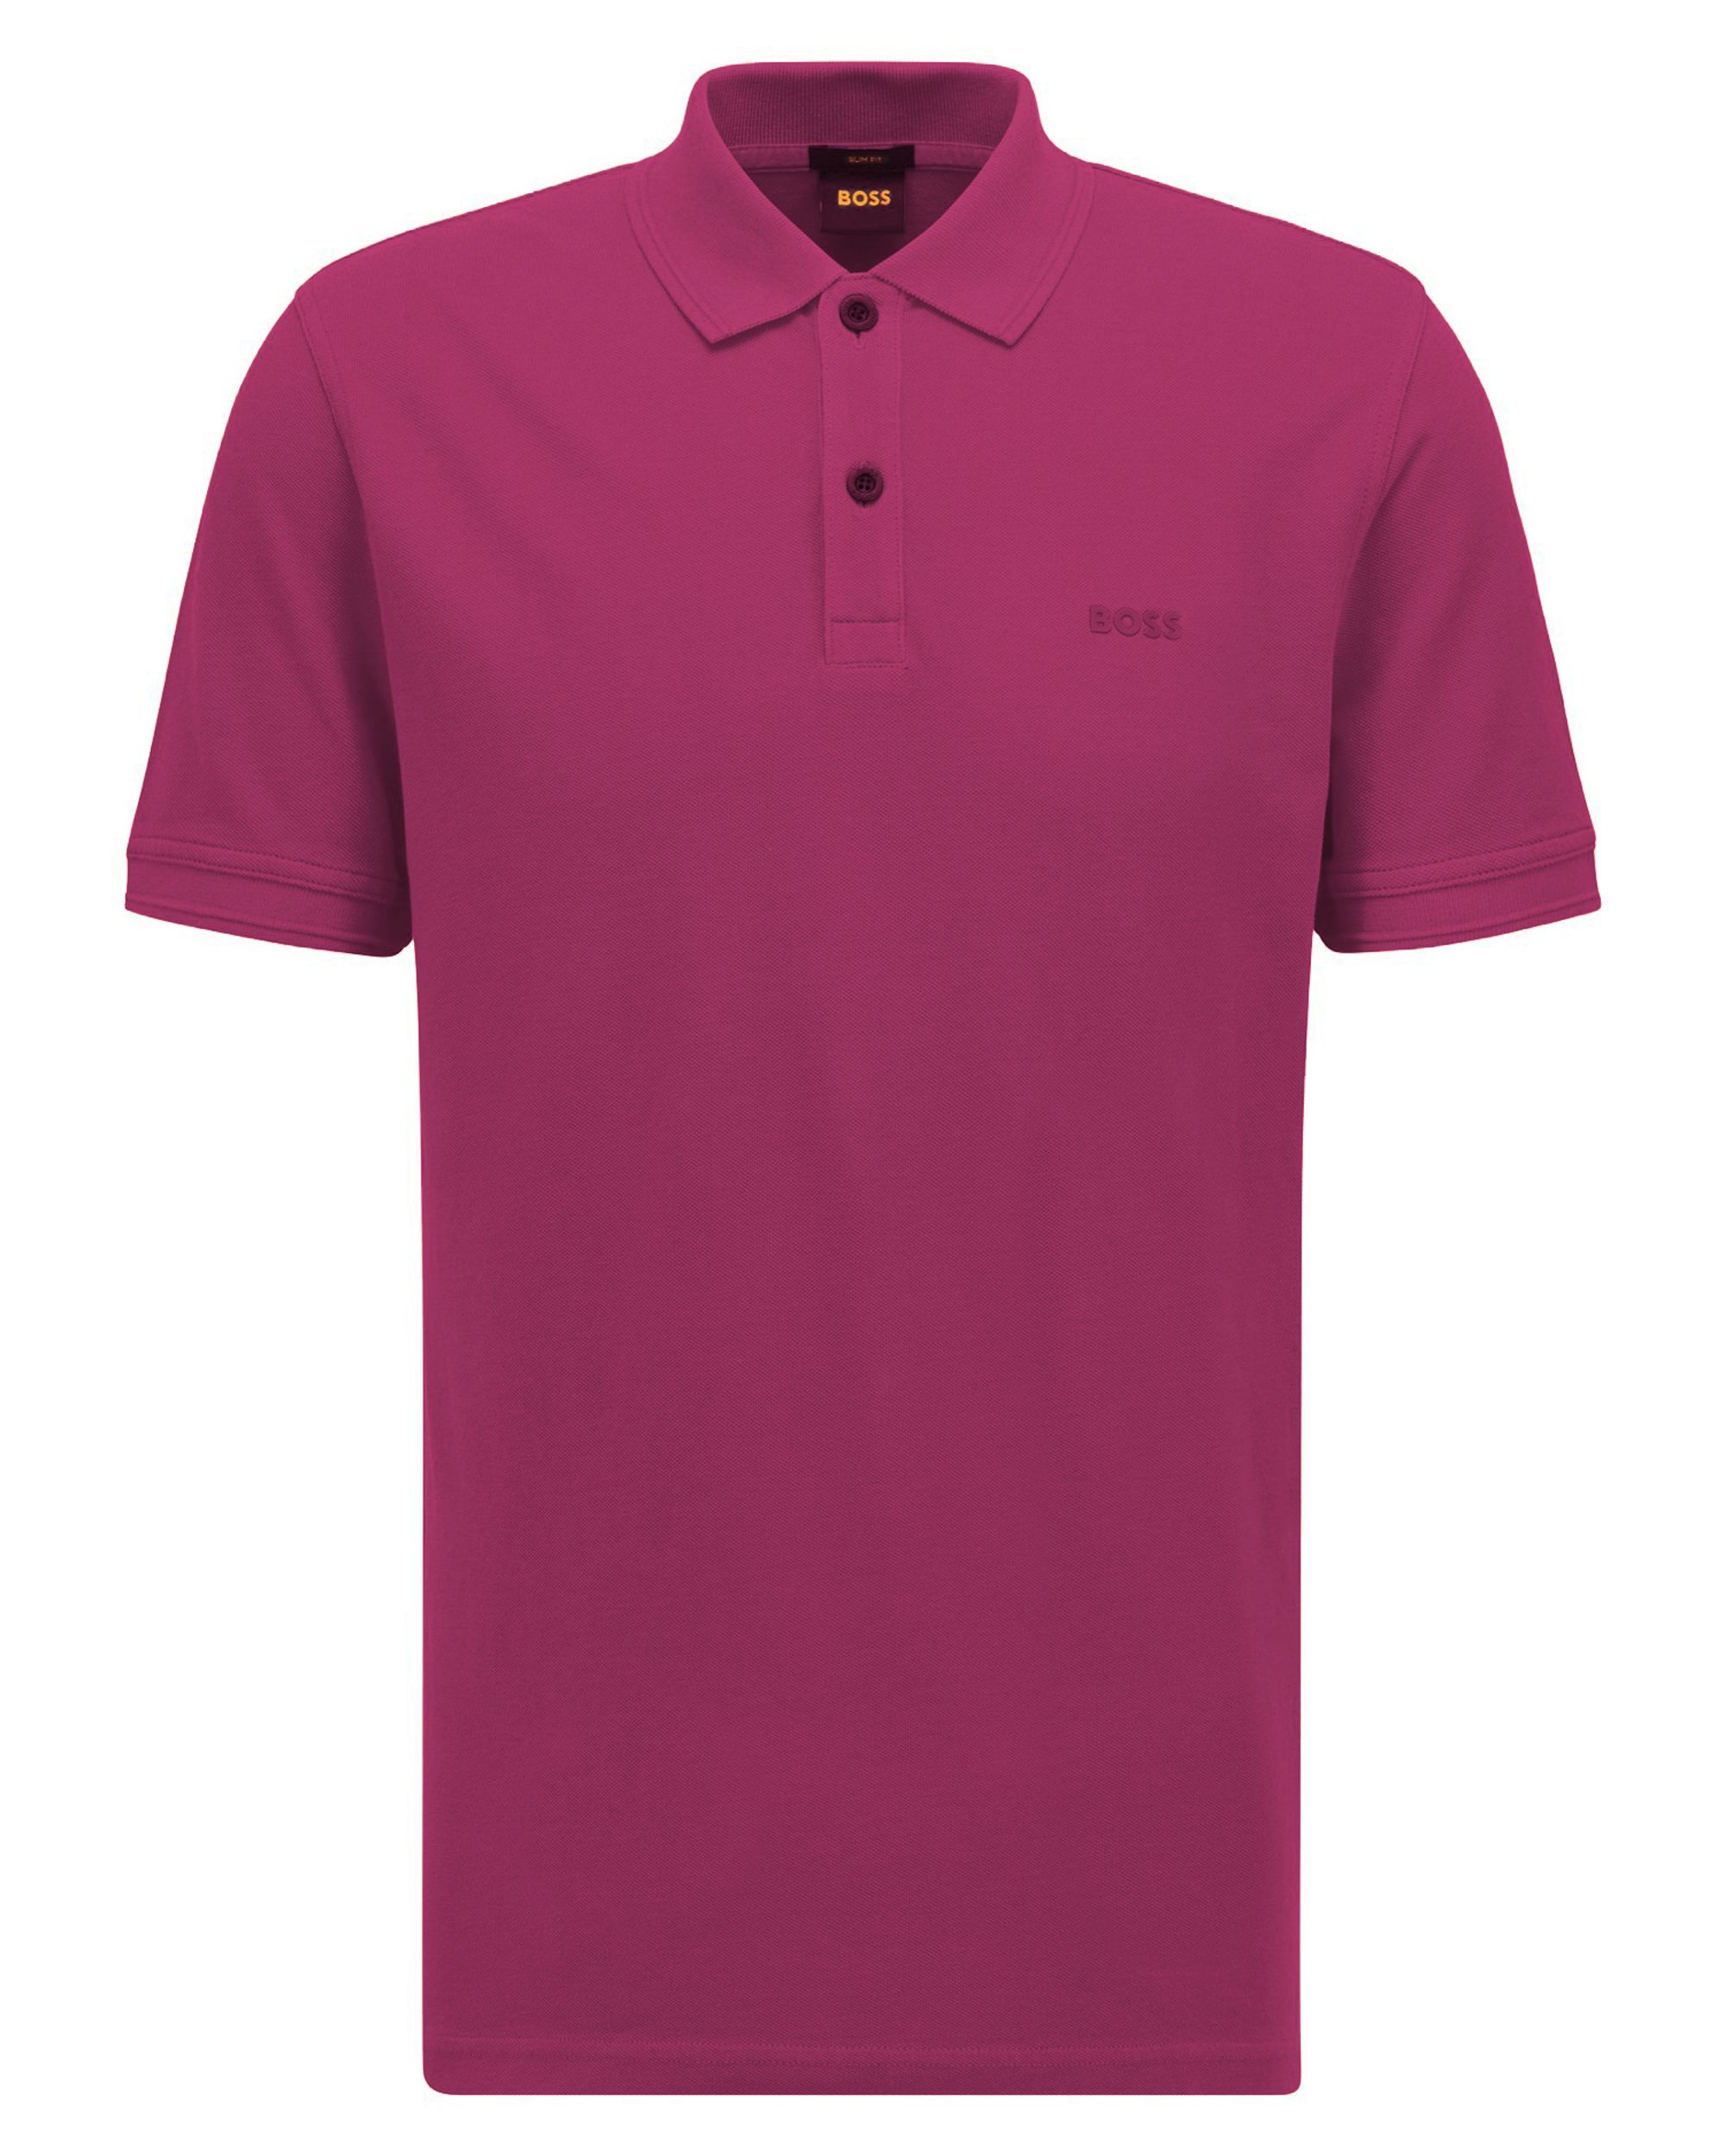 Hugo Boss Casual Prime Polo KM Paars 080843-001-L